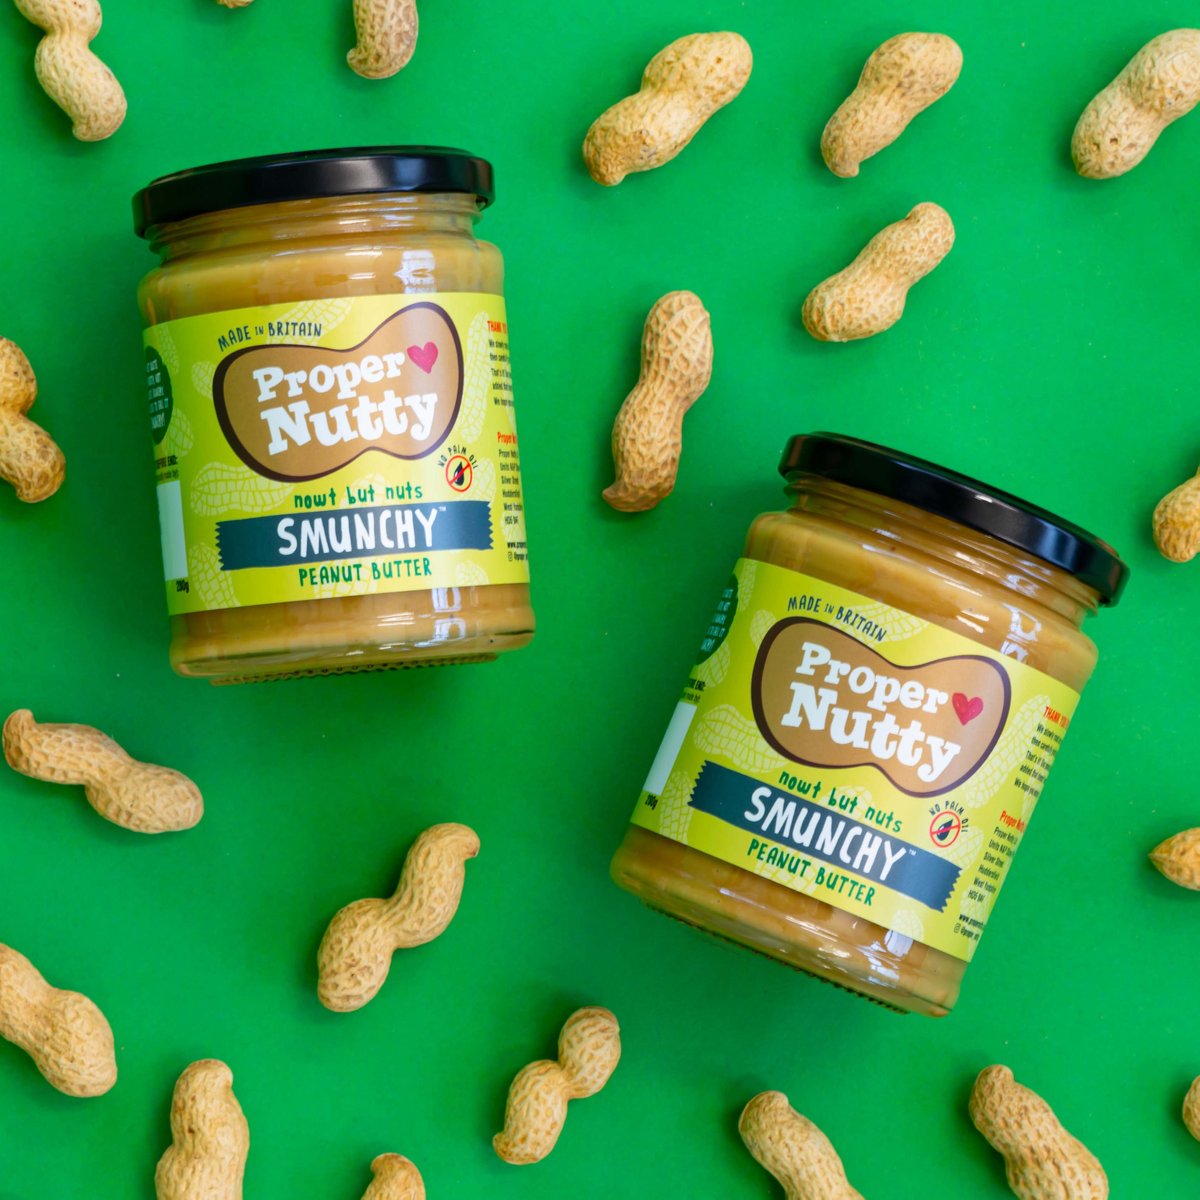 Veganuary is bigger than ever -so which plant-based products are people turning to? Enter: Proper Nutty Peanut Butter. Offering the highest percentage of nuts possible for the best nut butter experience, it’s 100% deliciously vegan* *Tried and tested by the Mercieca team 🥜